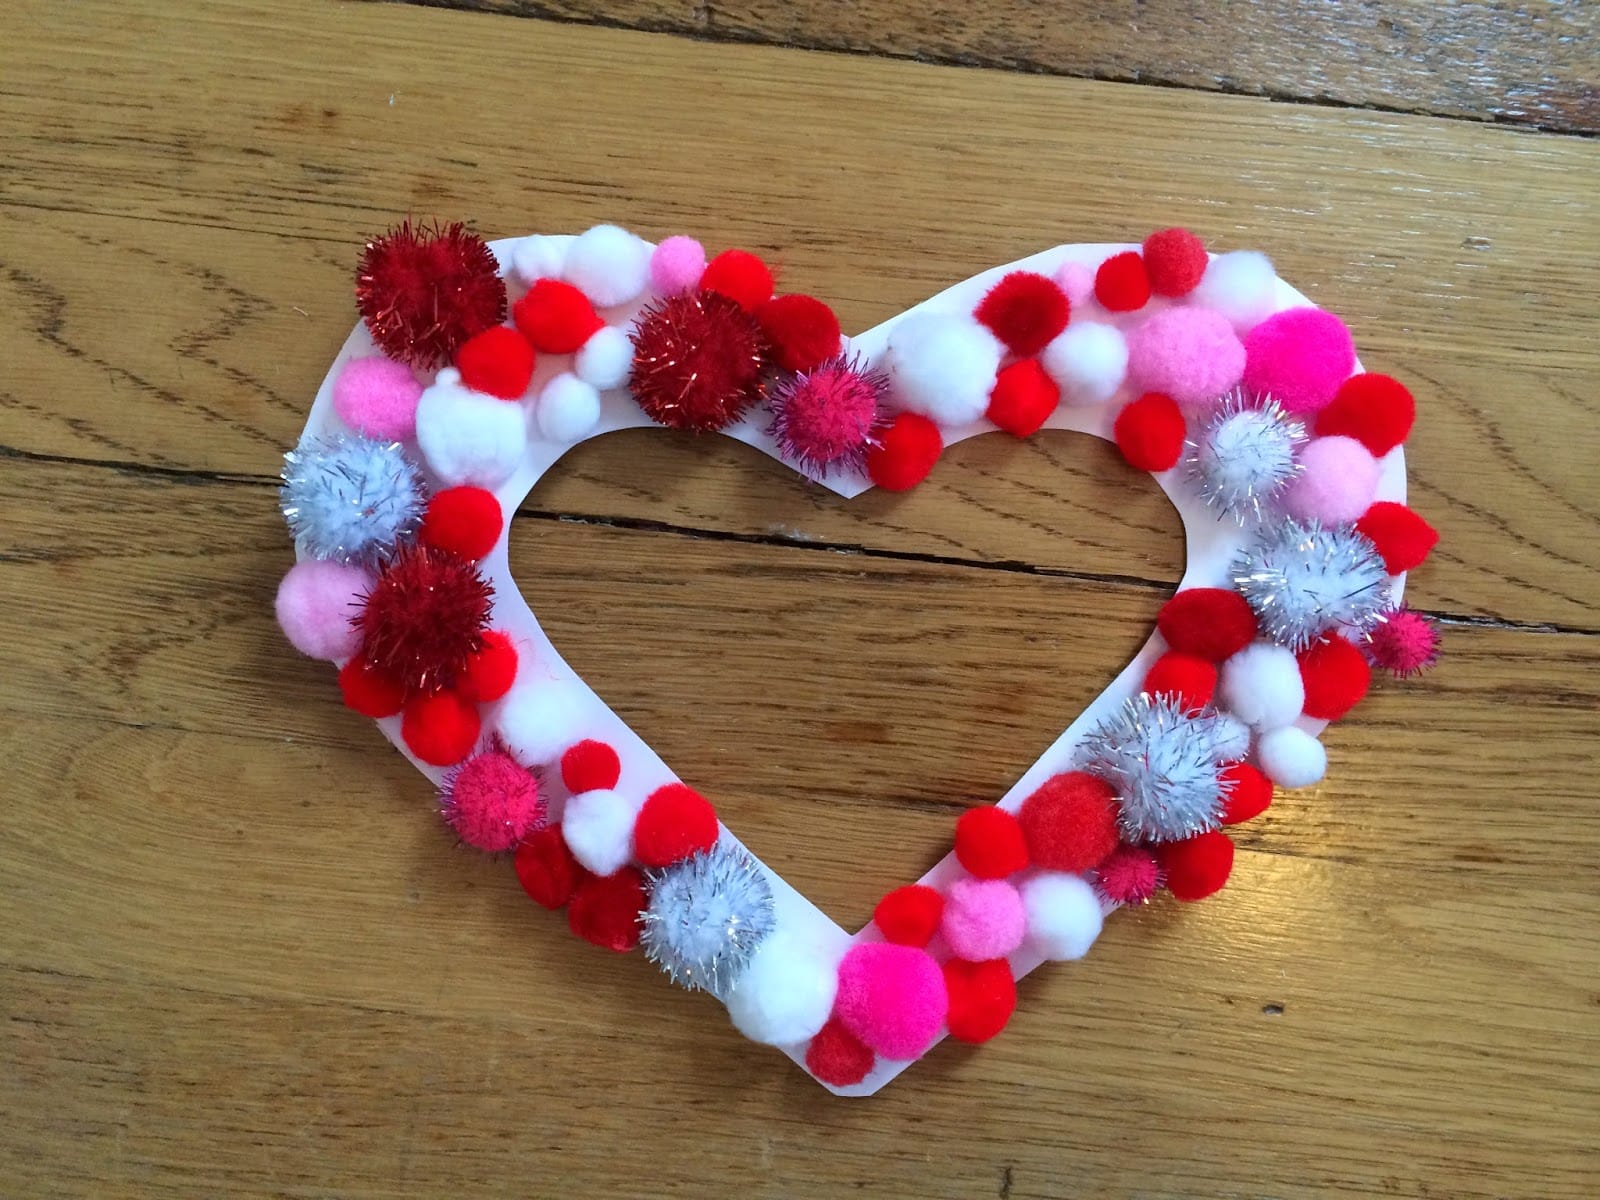 35-valentine-crafts-activities-for-kids-the-chirping-moms